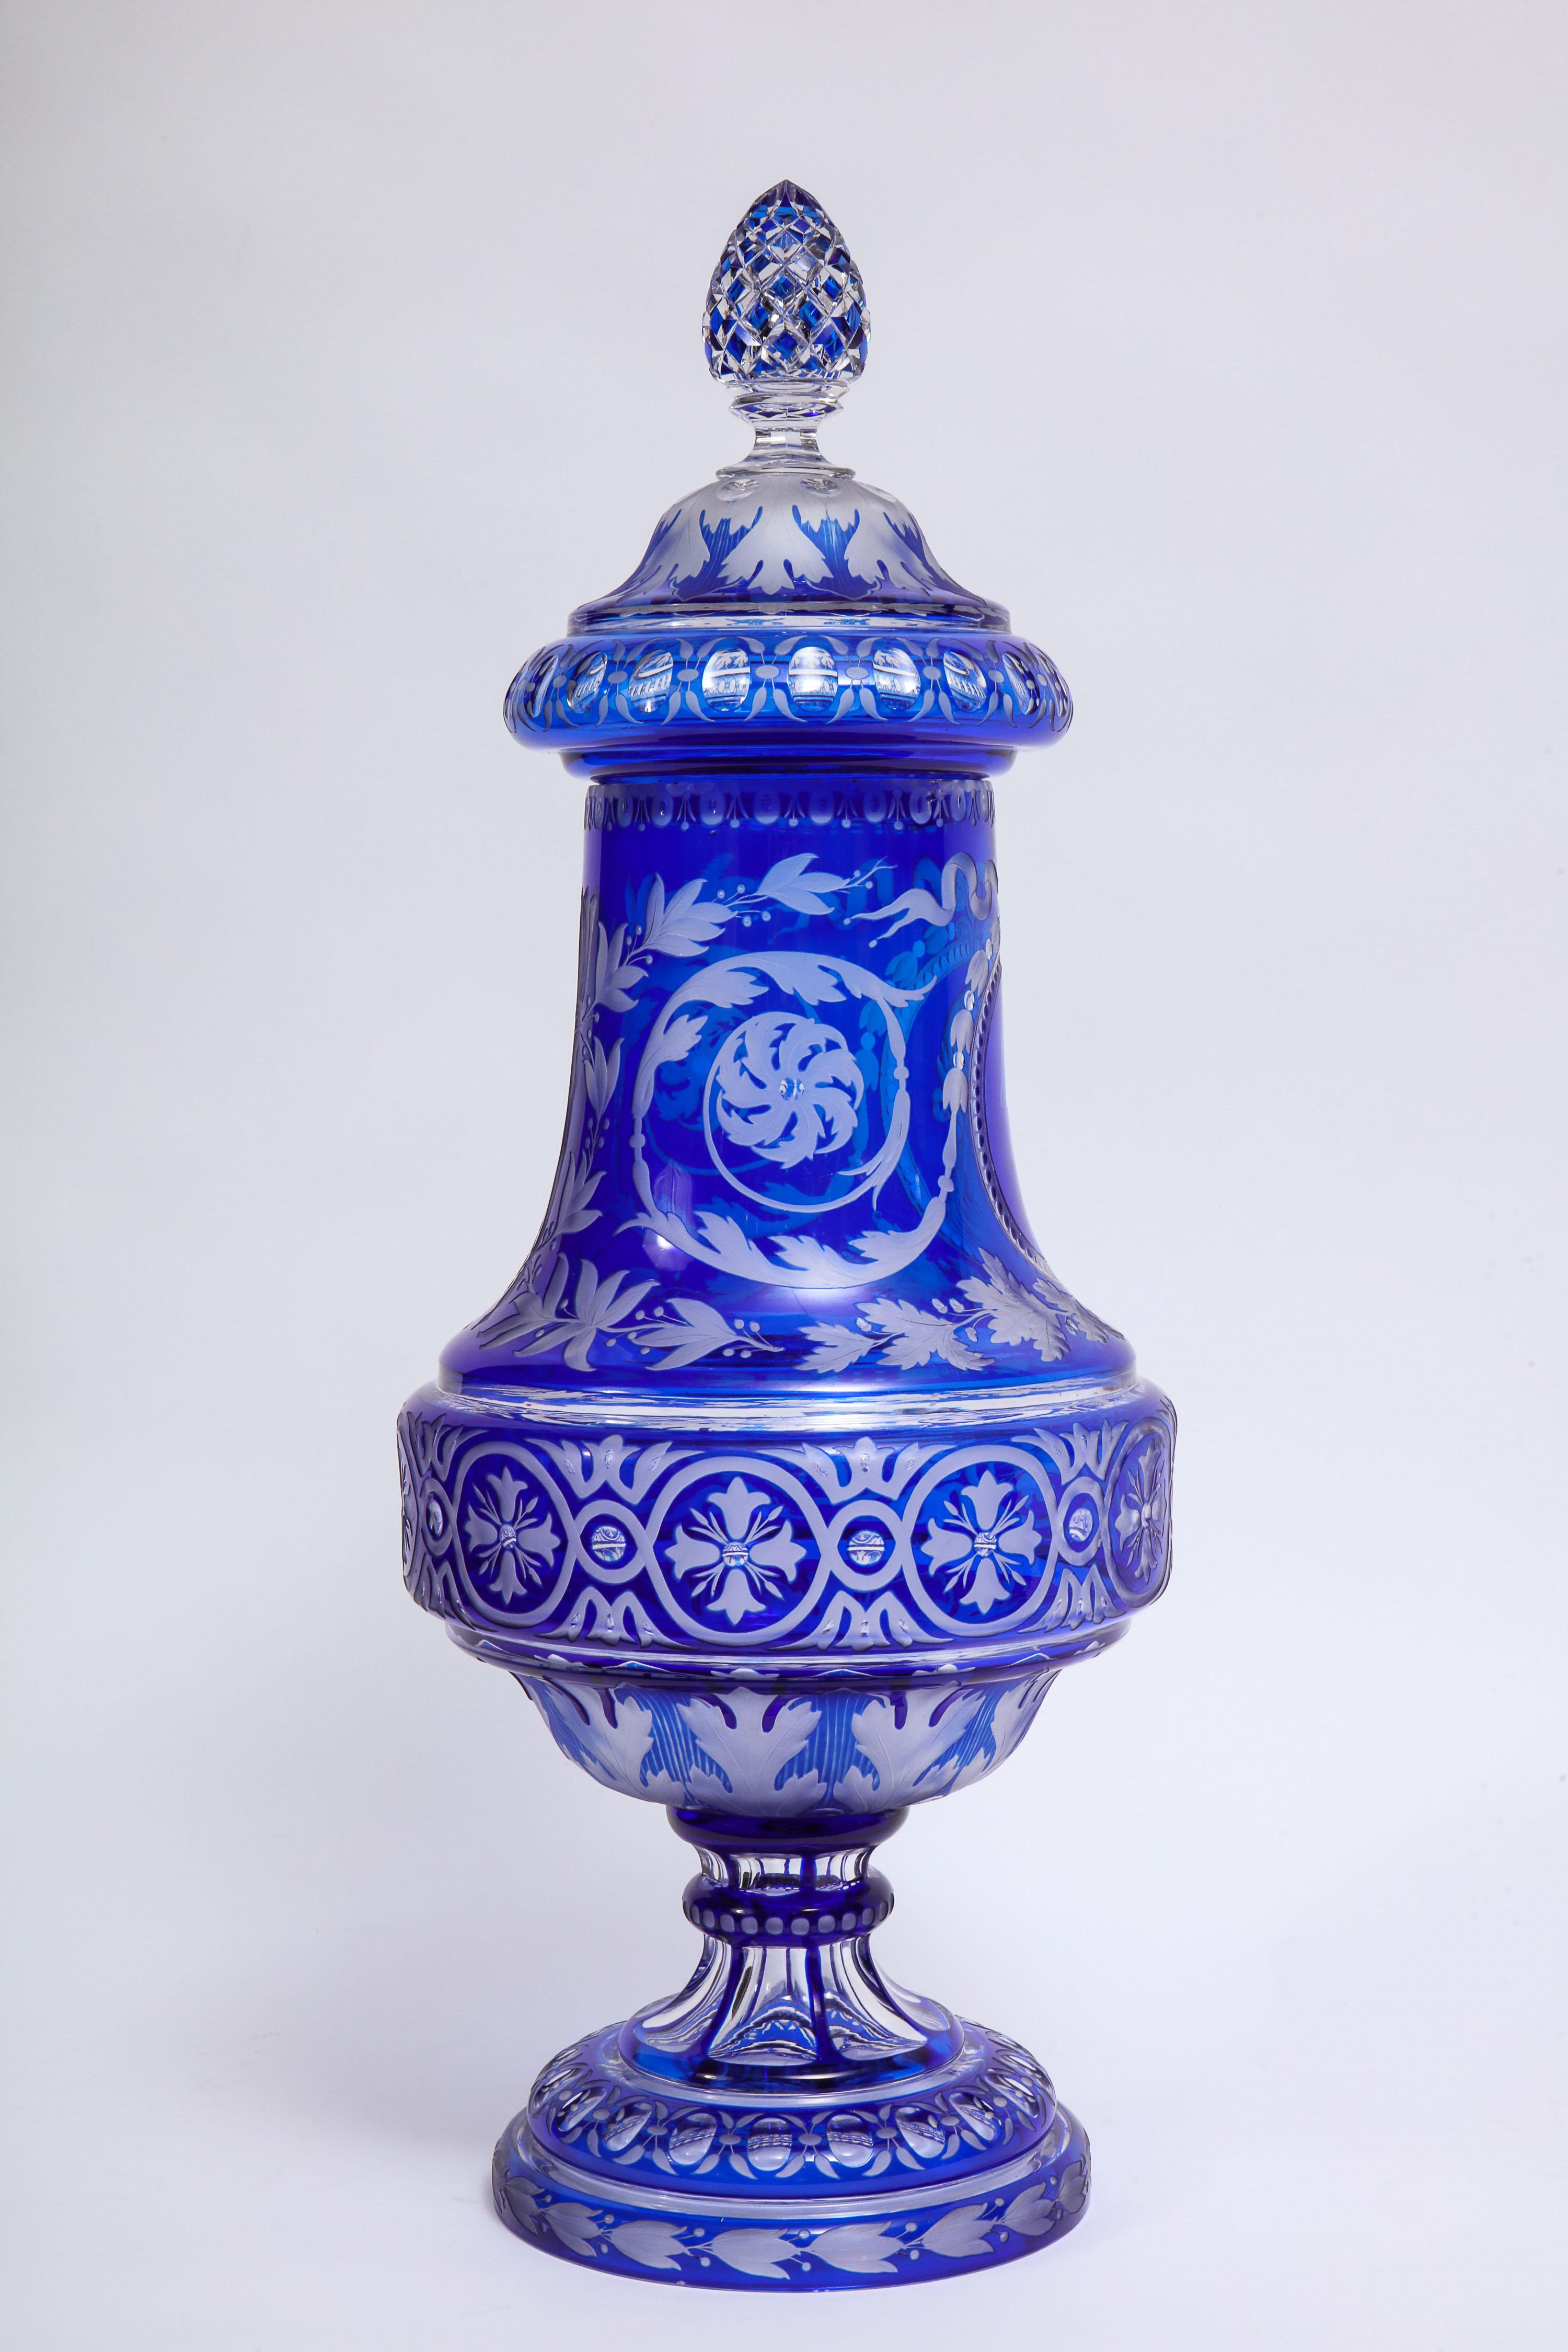 A spectacular and important 19th century Louis XVI style baccarat double-overlay blue-over-clear wheel carved, etched and acid washed covered vase, attributed to Jean Baptiste Simon. This vase is exceptionally made with double-overlay